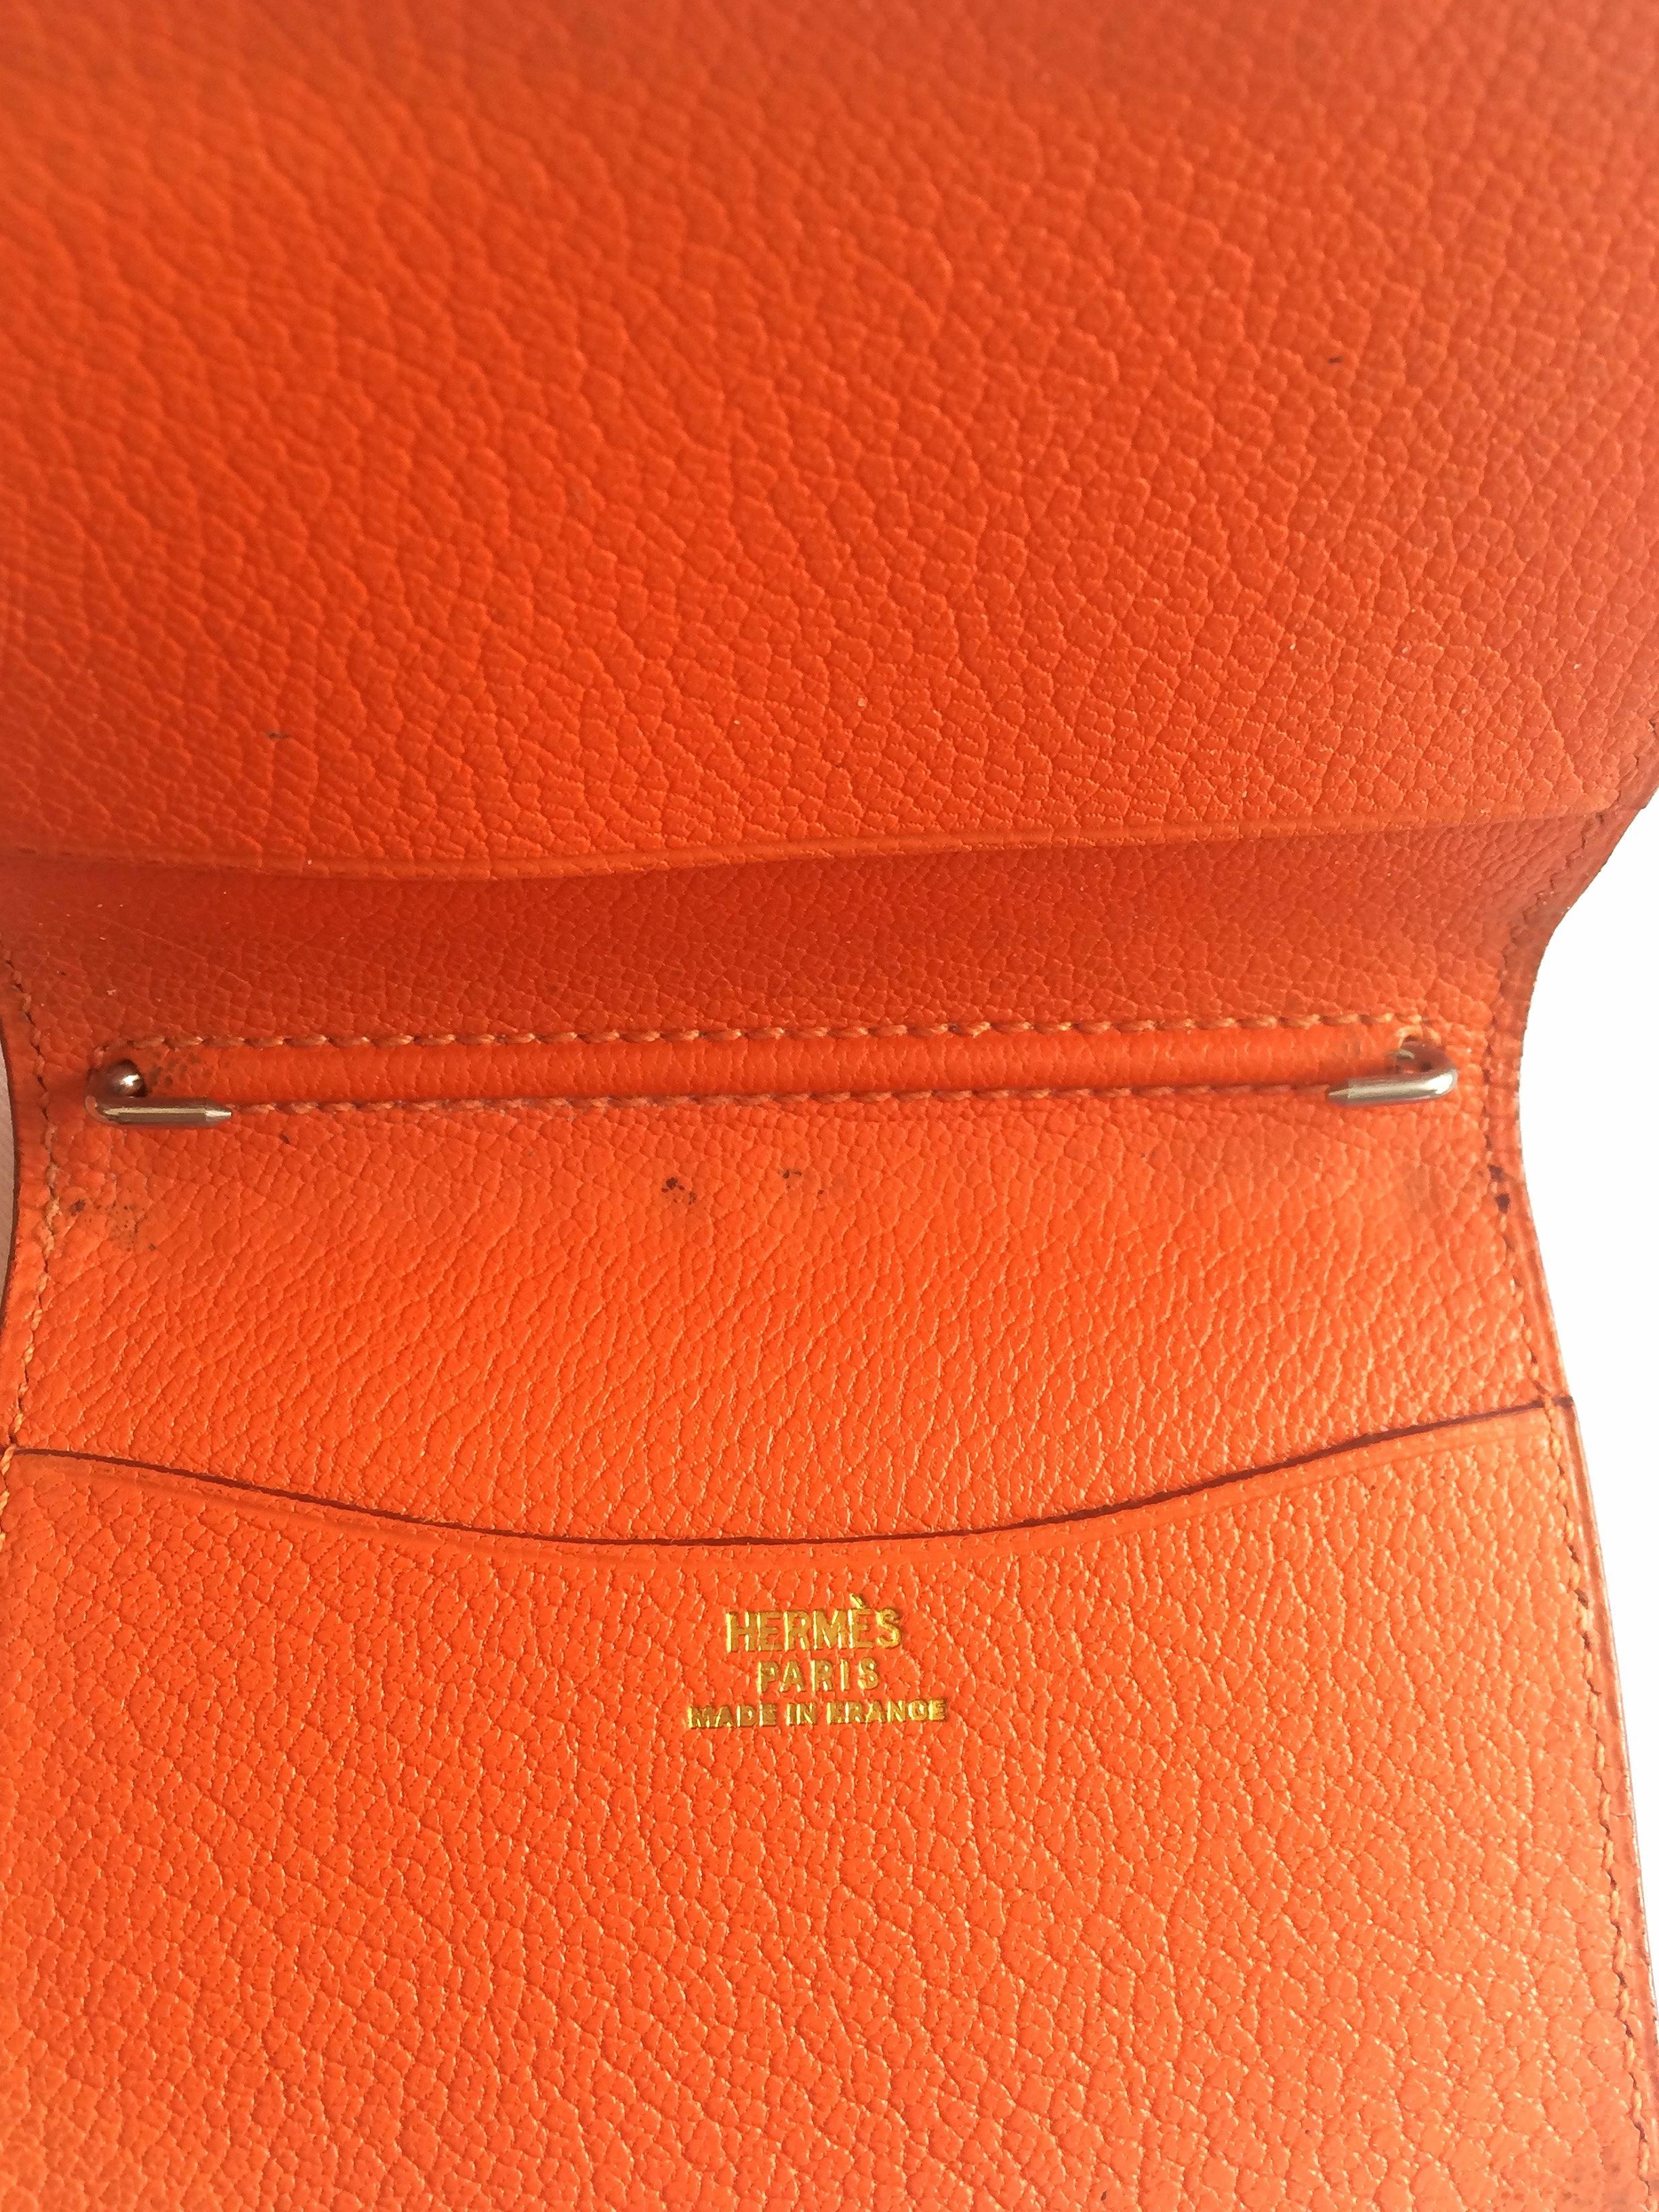 Women's or Men's Vintage HERMES orange leather diary, schedule book cover PM with silver pencil For Sale